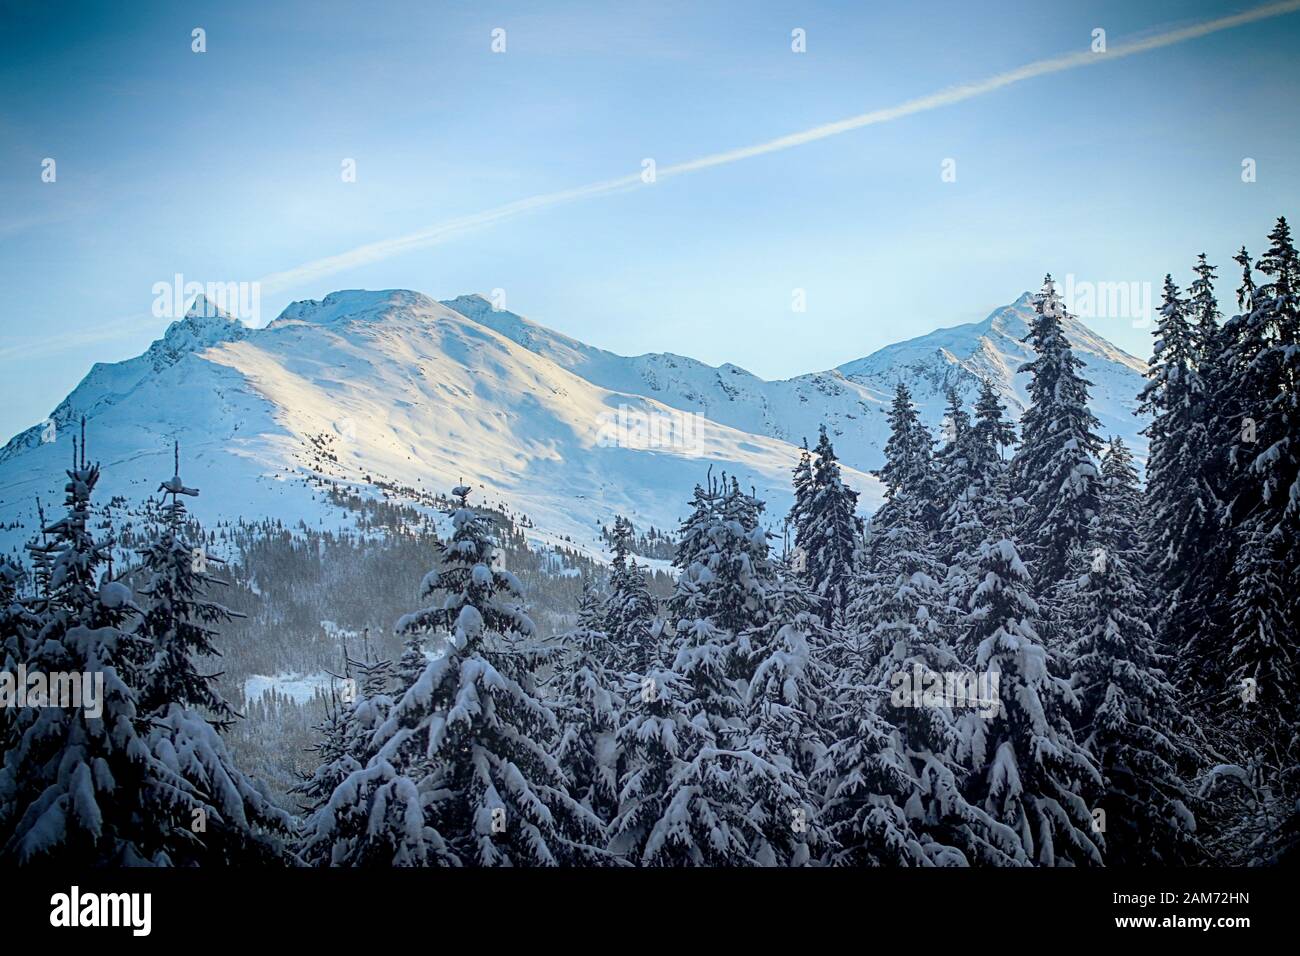 Austria, panoramic winter view the Tauern Alps mountains covered by snow framed by fir trees along the alpine route from Pass Thurn to Mittersill in a Stock Photo